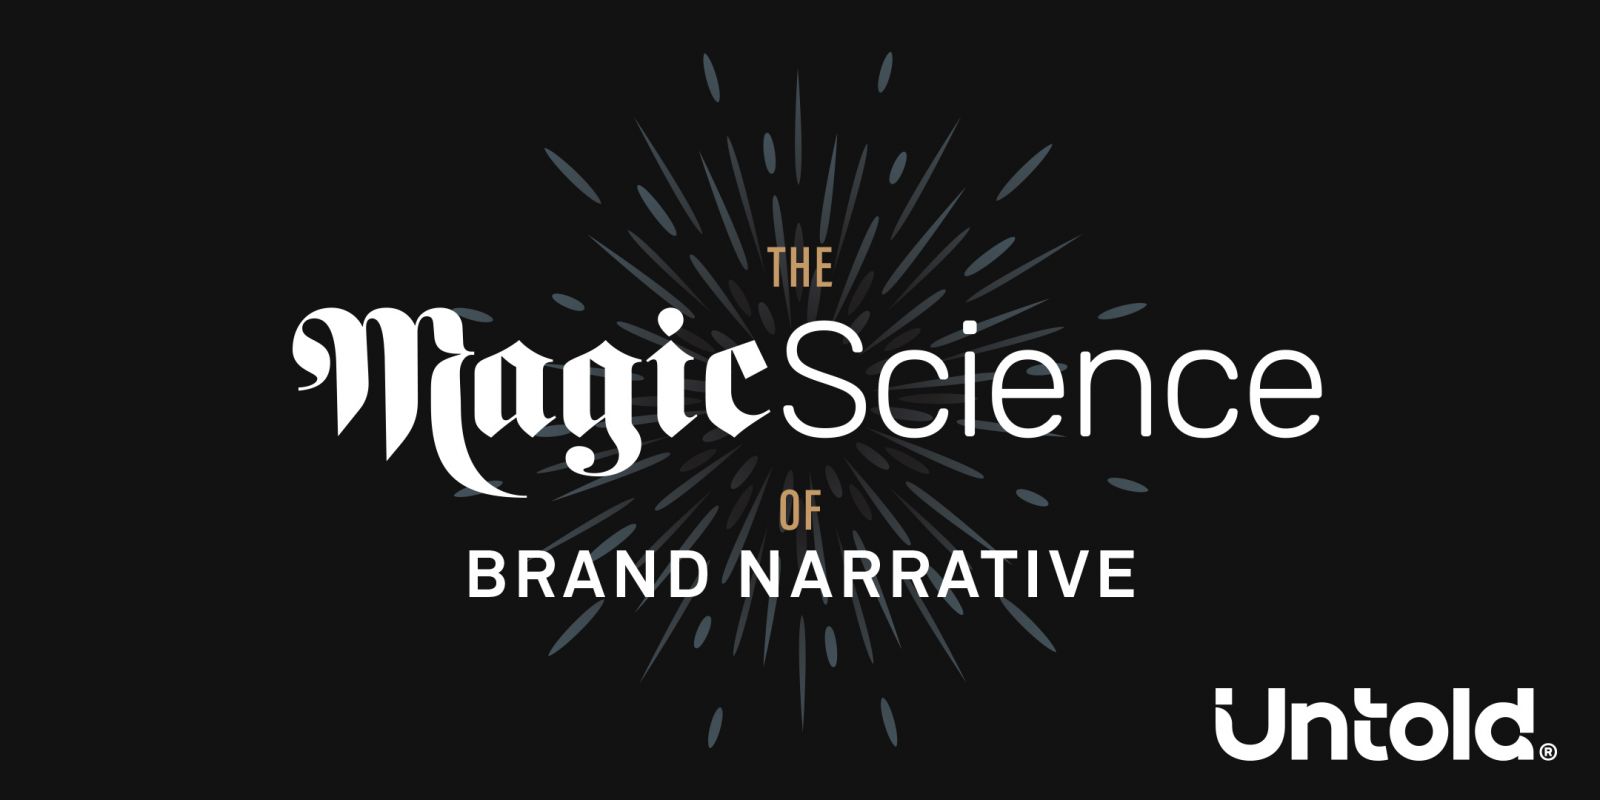 The Magic Science of Brand Narrative